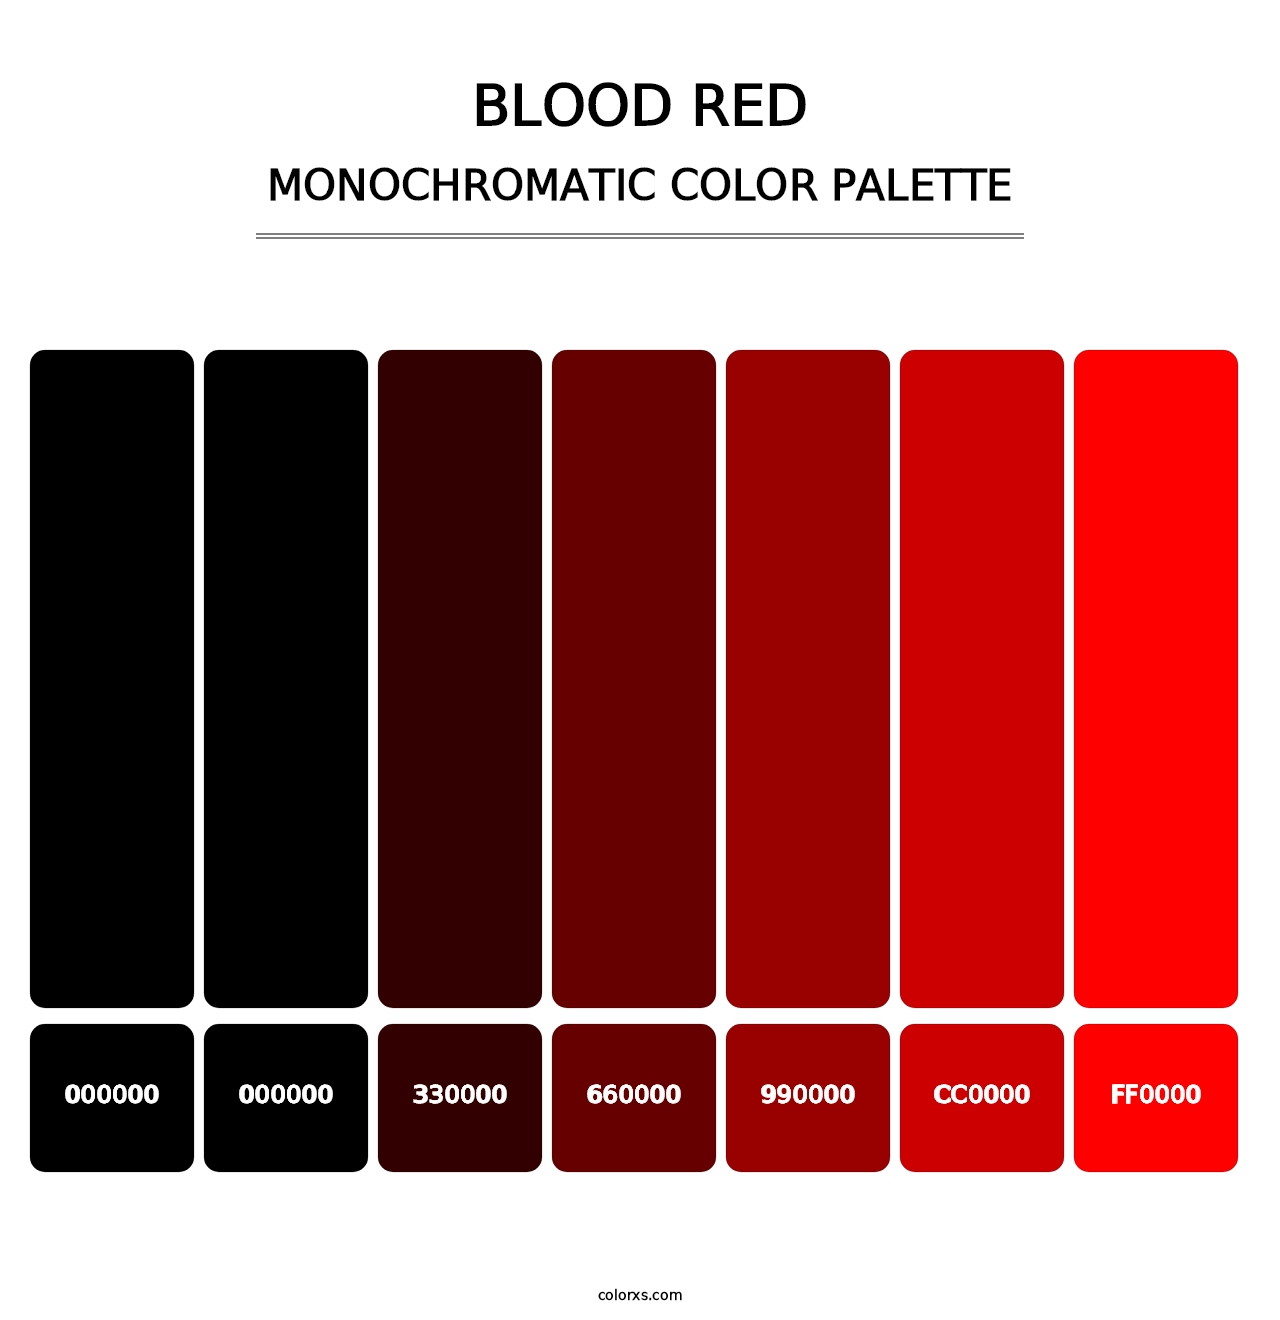 Blood Red - Monochromatic Color Palette